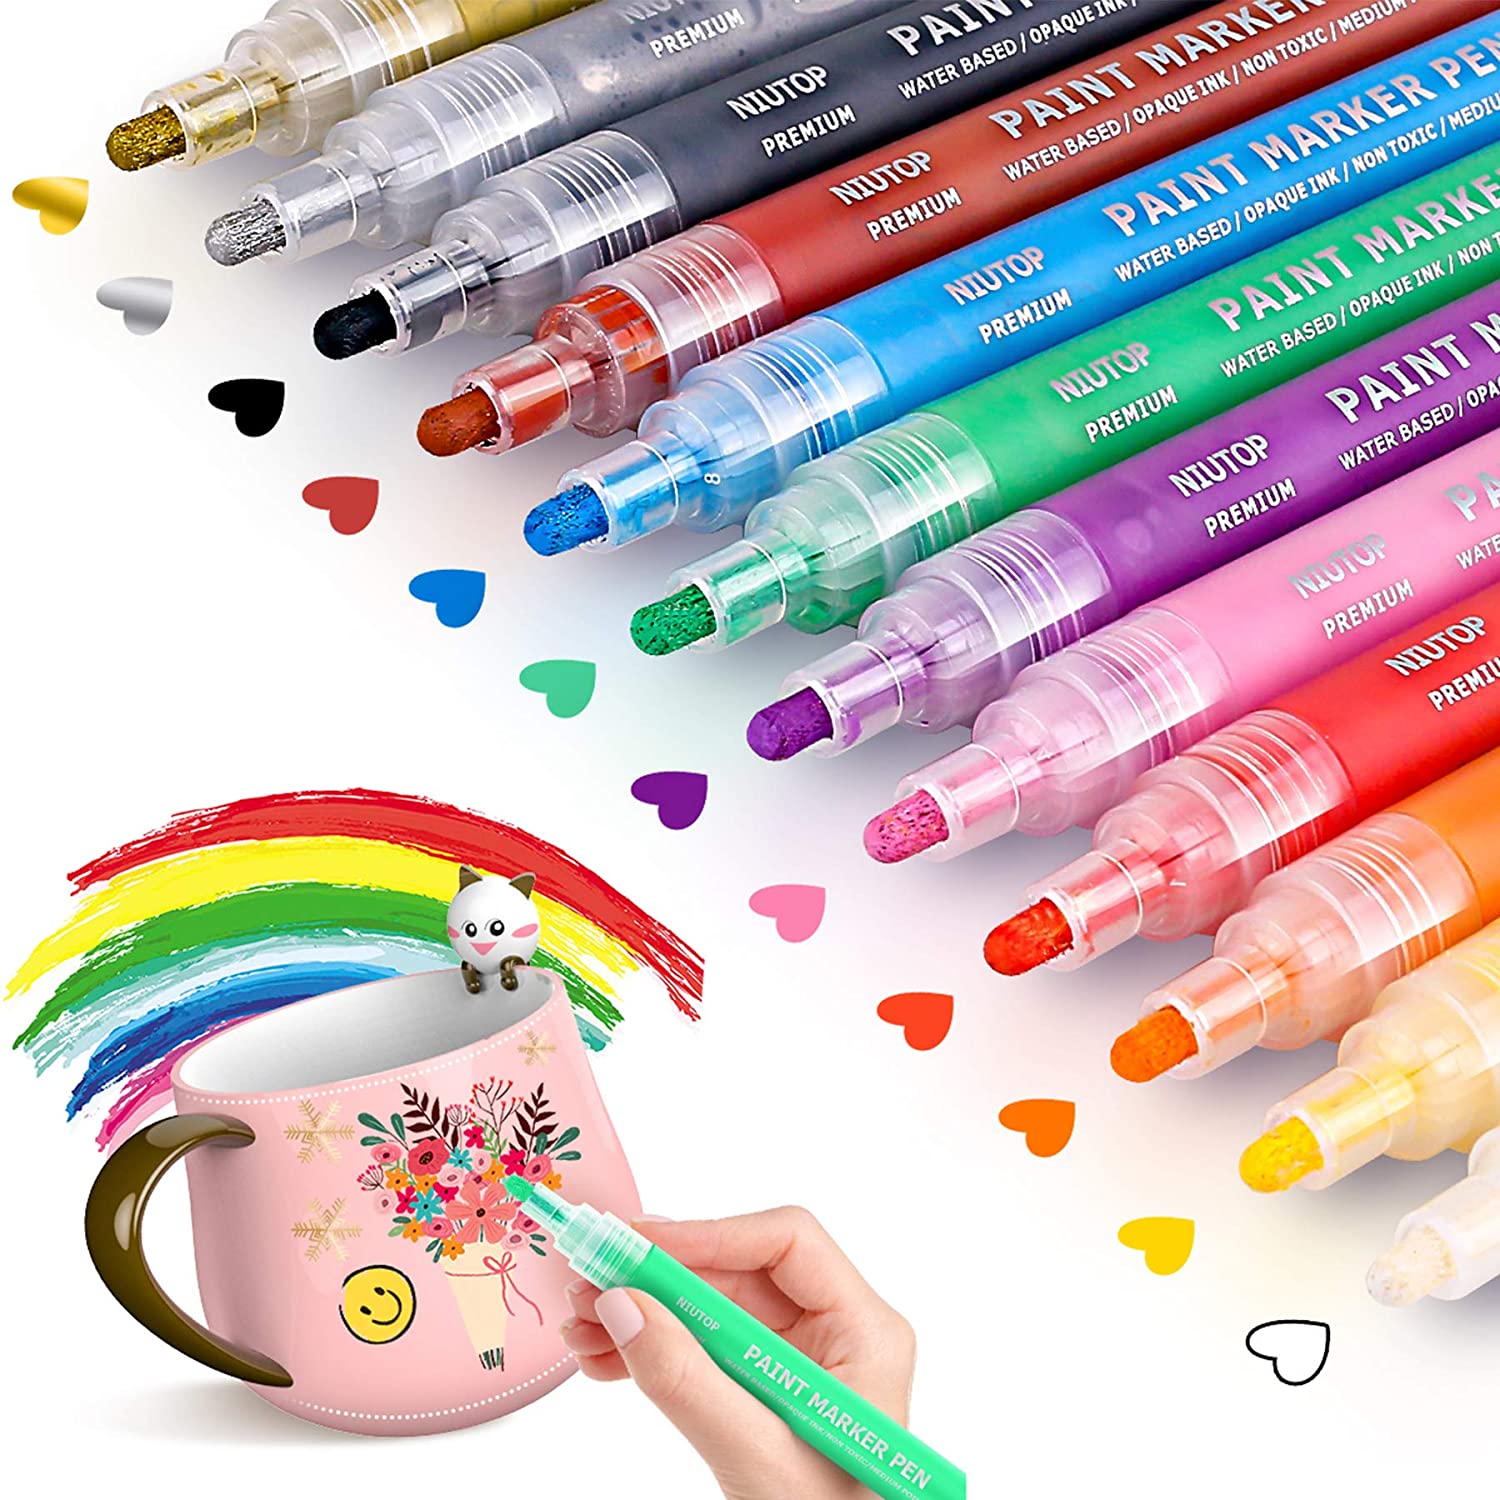 PINTAR Pastel Acrylic Paint Pens/Markers for Rock Painting, Wood